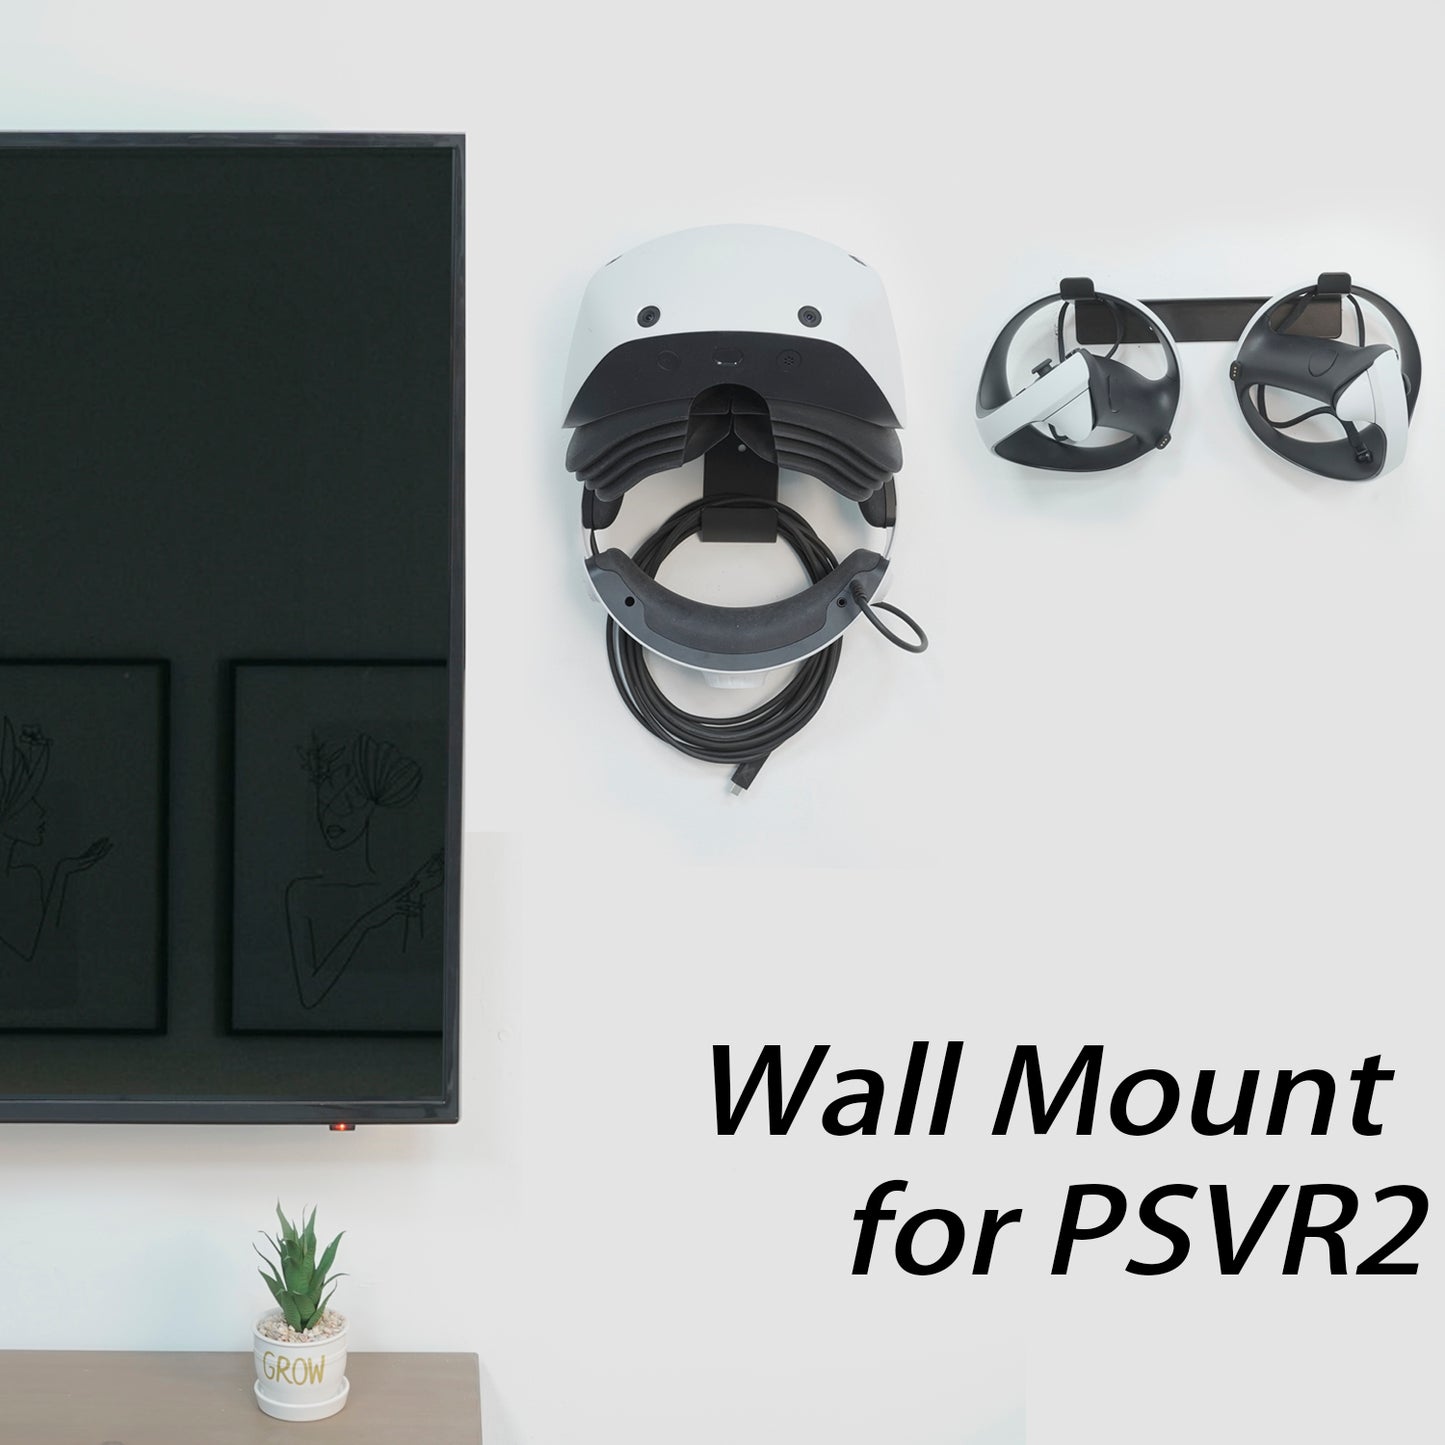 Monzlteck PSVR2 headset controller wall mount,compatible with PSVR1